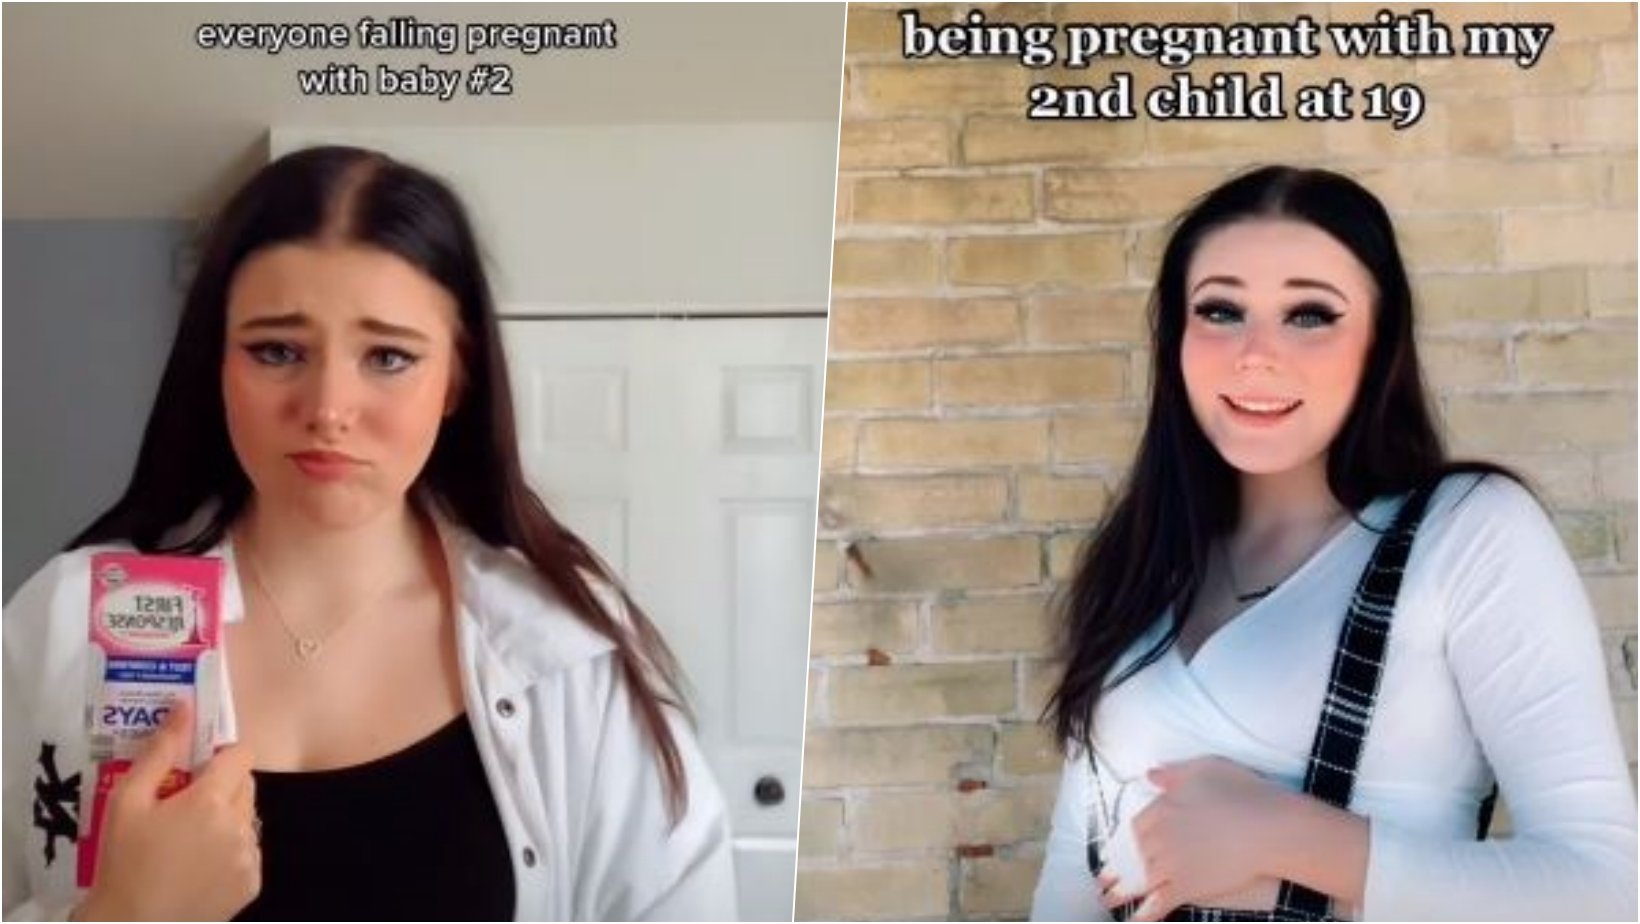 6 facebook cover 11.jpg?resize=1200,630 - 19-Year-Old Mom Reveals She Is Pregnant With Her Second Child, But Some Are Not Happy With Her Pregnancy Announcement